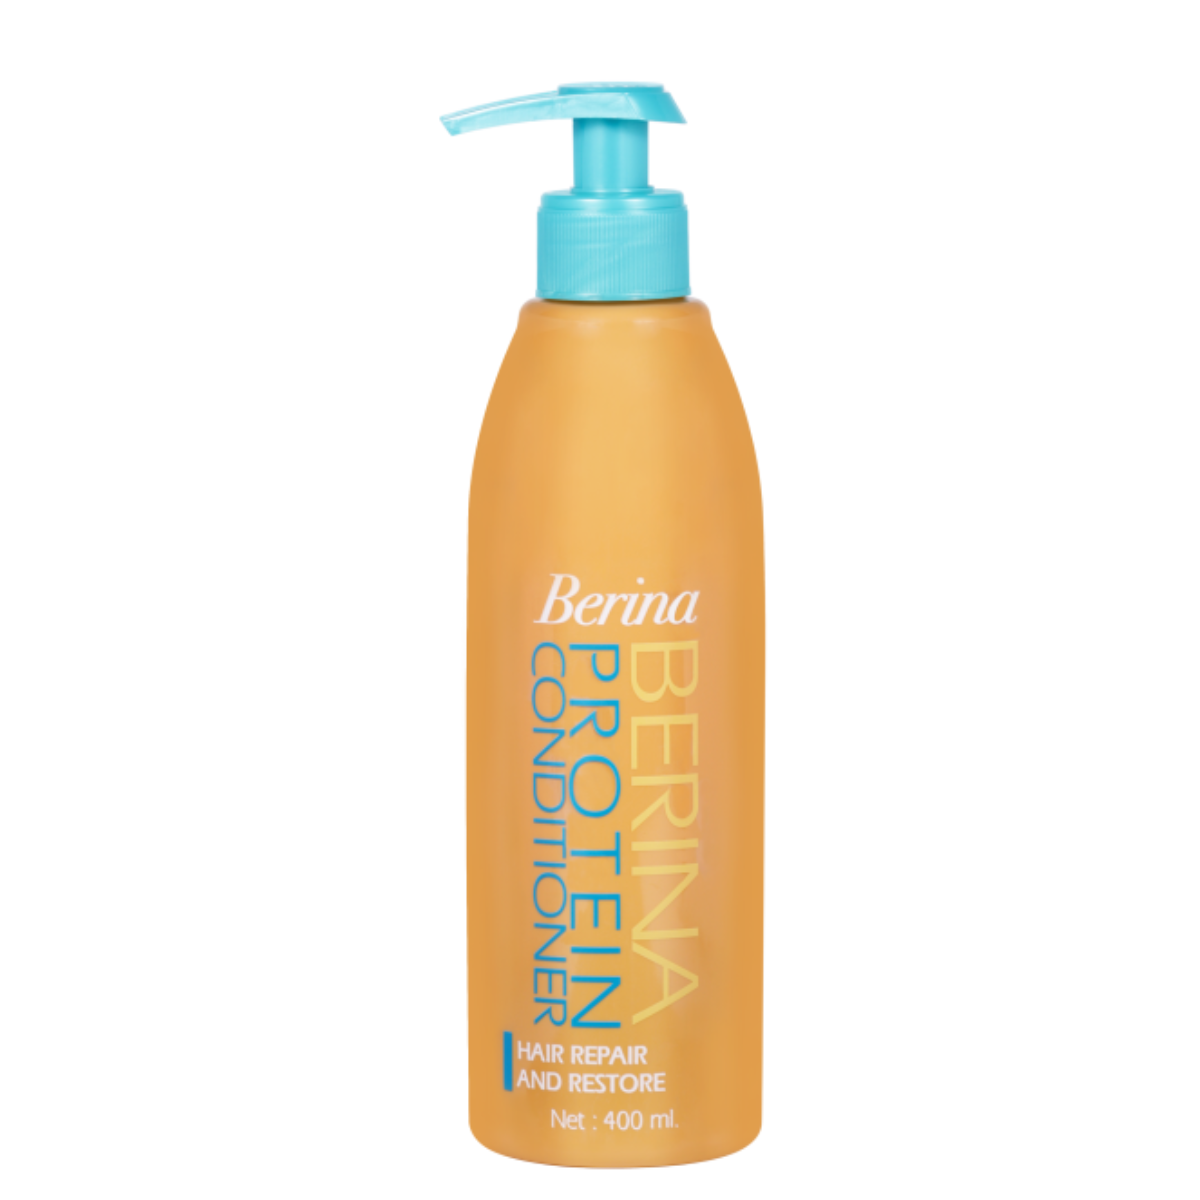 Berina Protein Conditioner Repair and Restore - Hydrolyzed Protein and Silicone Formula